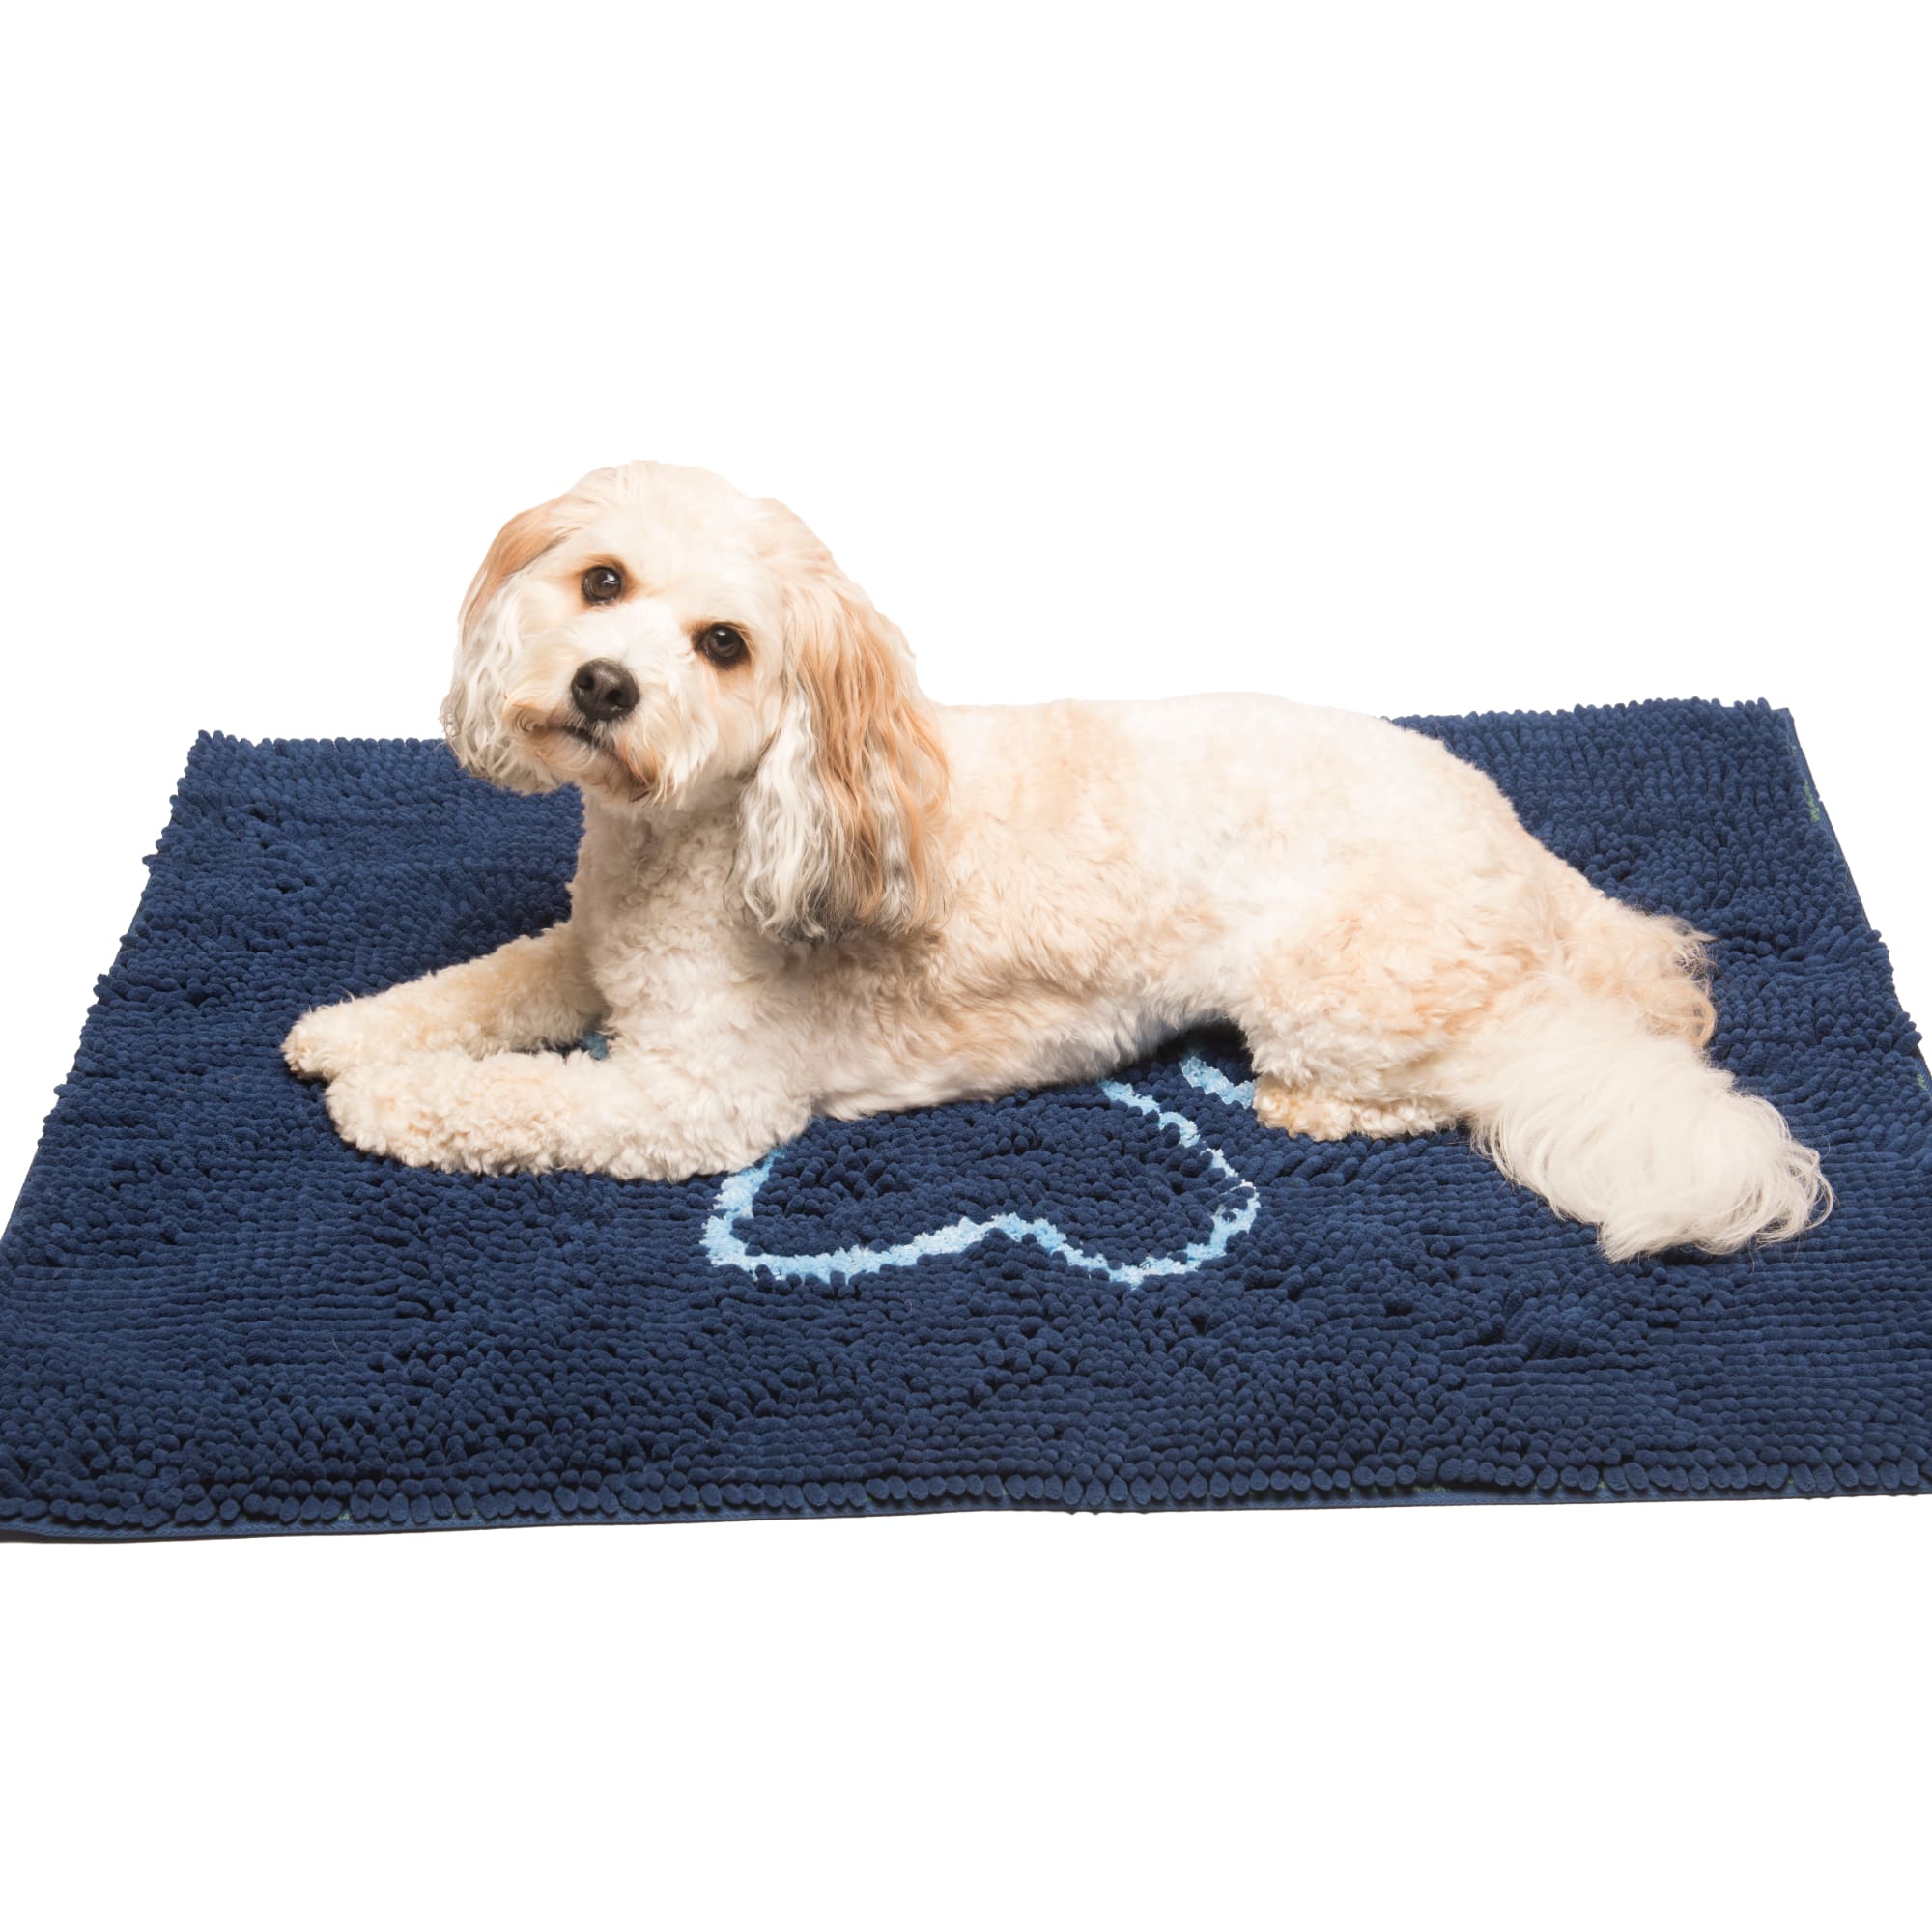 Dog Gone Smart Dirty Dog Bermuda Blue Doormat for Dogs, 35" L X 26" W, Large